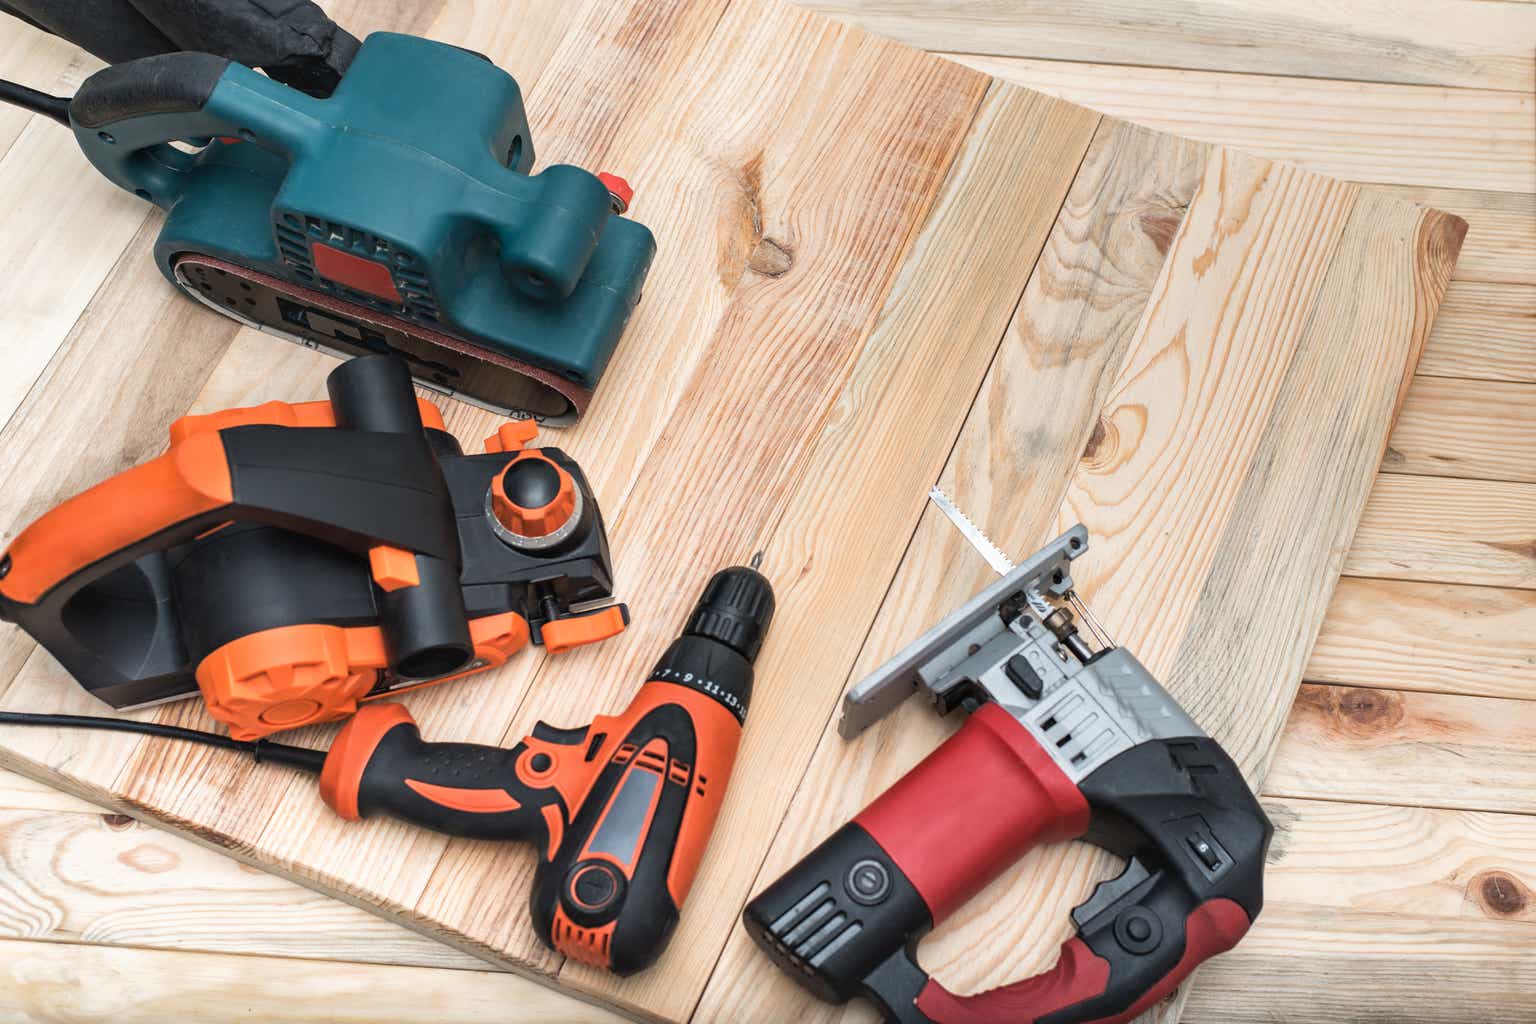 mover indre Anslået Understanding The Power Tools Market With Makita And SWK (OTCMKTS:MKEWF) |  Seeking Alpha